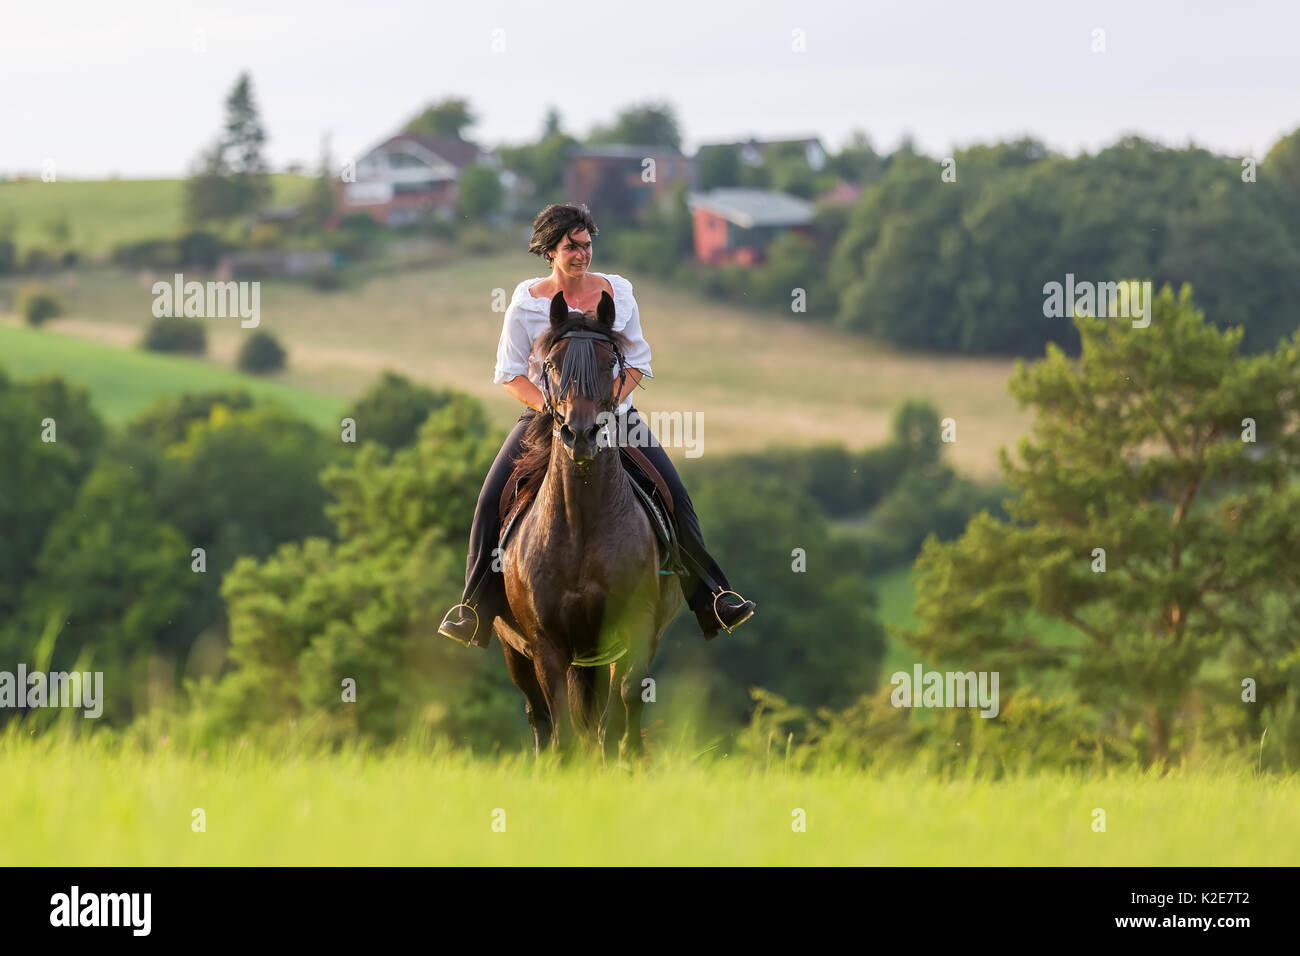 mature woman riding an Andalusian horse in a country landscape Stock Photo